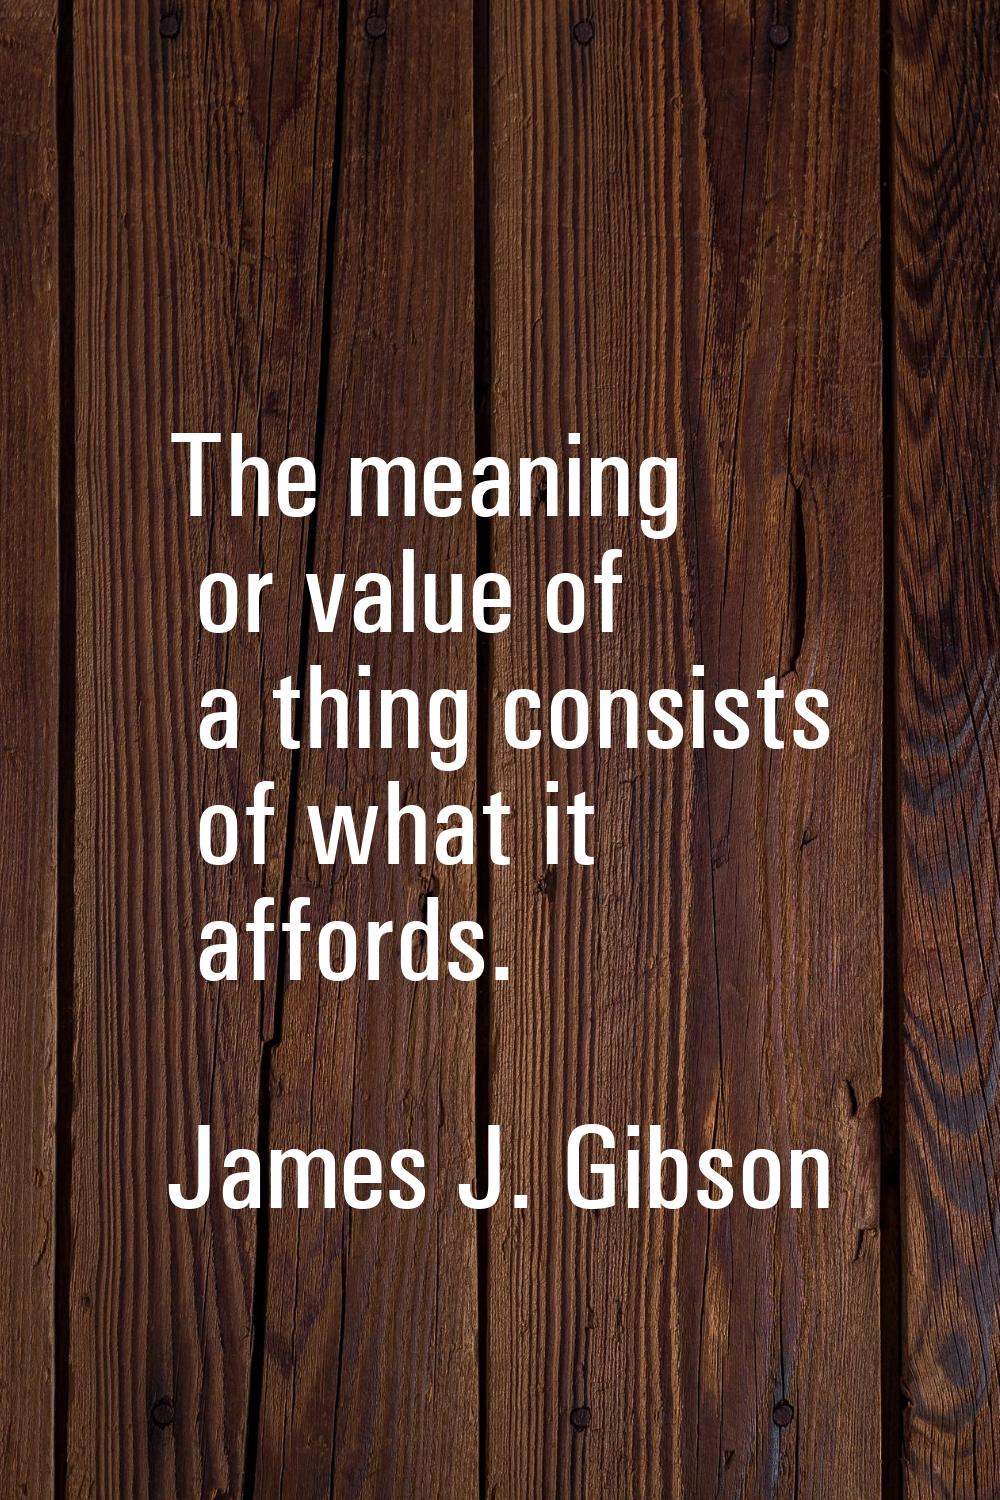 The meaning or value of a thing consists of what it affords.